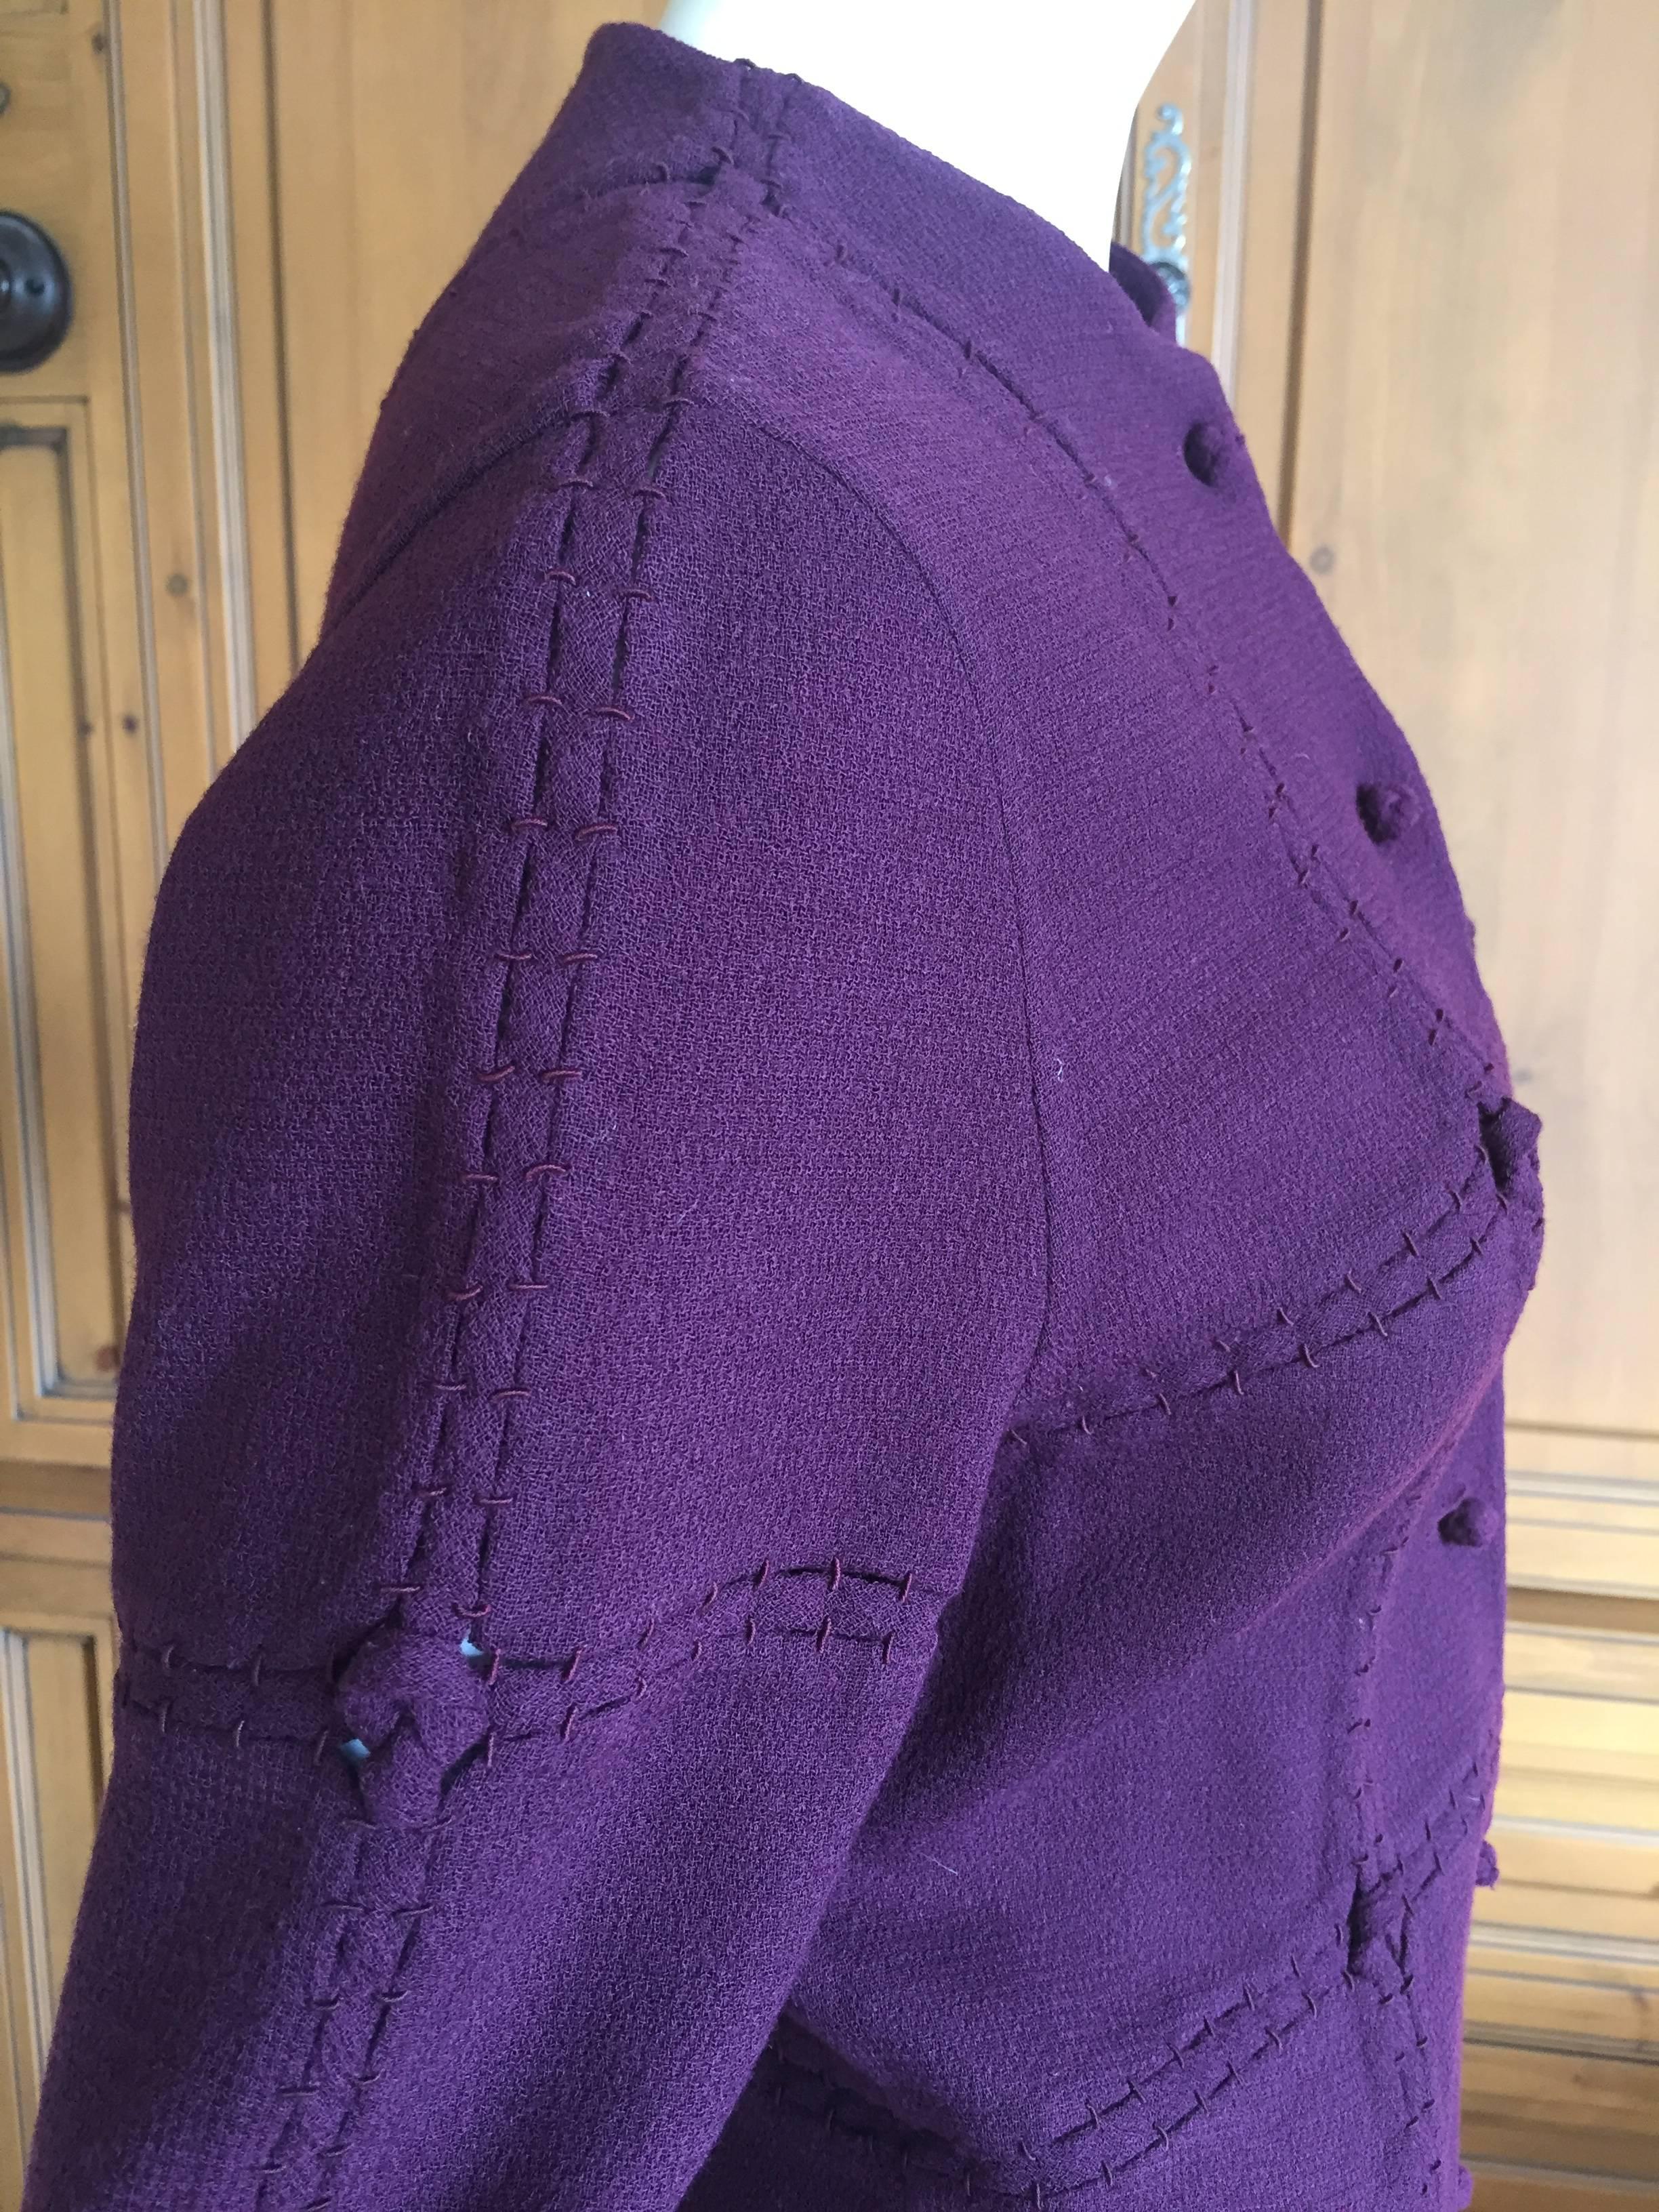 Chado Ralph Rucci Purple Jacket with Open Stitch Details  For Sale 1